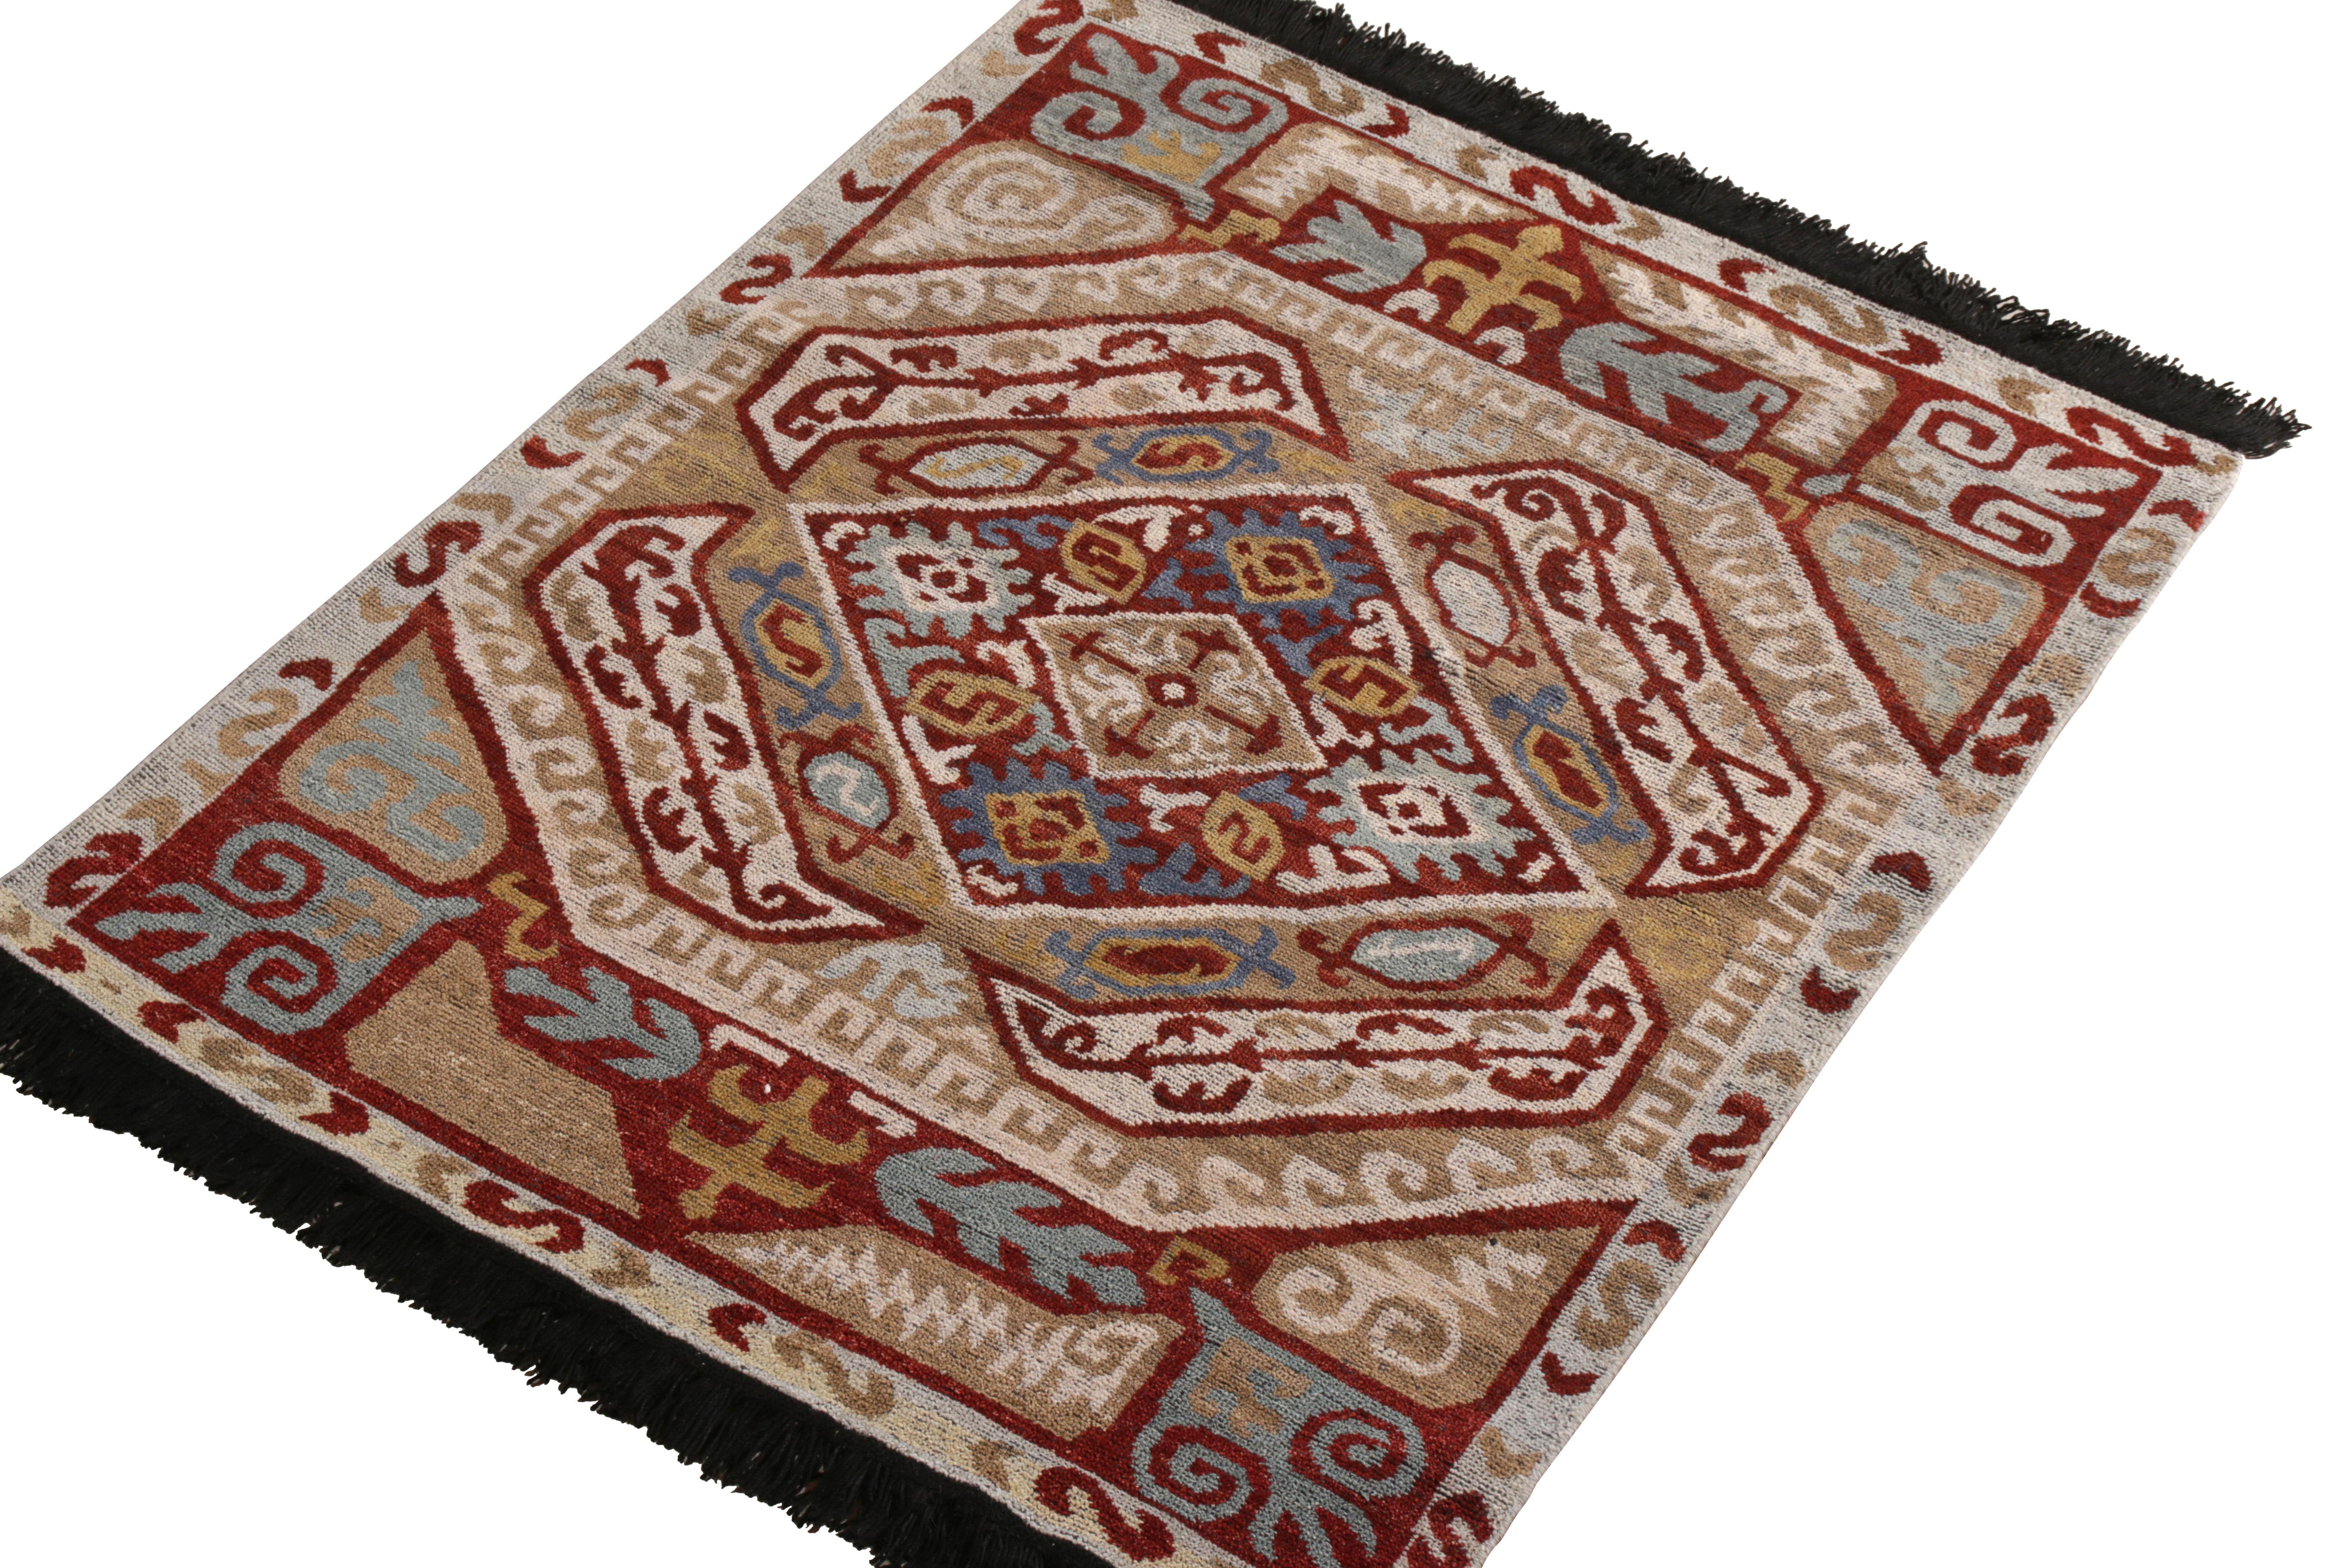 A 4x5 ode to venerated tribal rug styles from Rug & Kilim’s Burano Collection. Hand knotted in notably soft Ghazni wool, enjoying beige-brown and red hues in the prevailing colorways honoring classic rugs. 

On the design: Varied blue accents